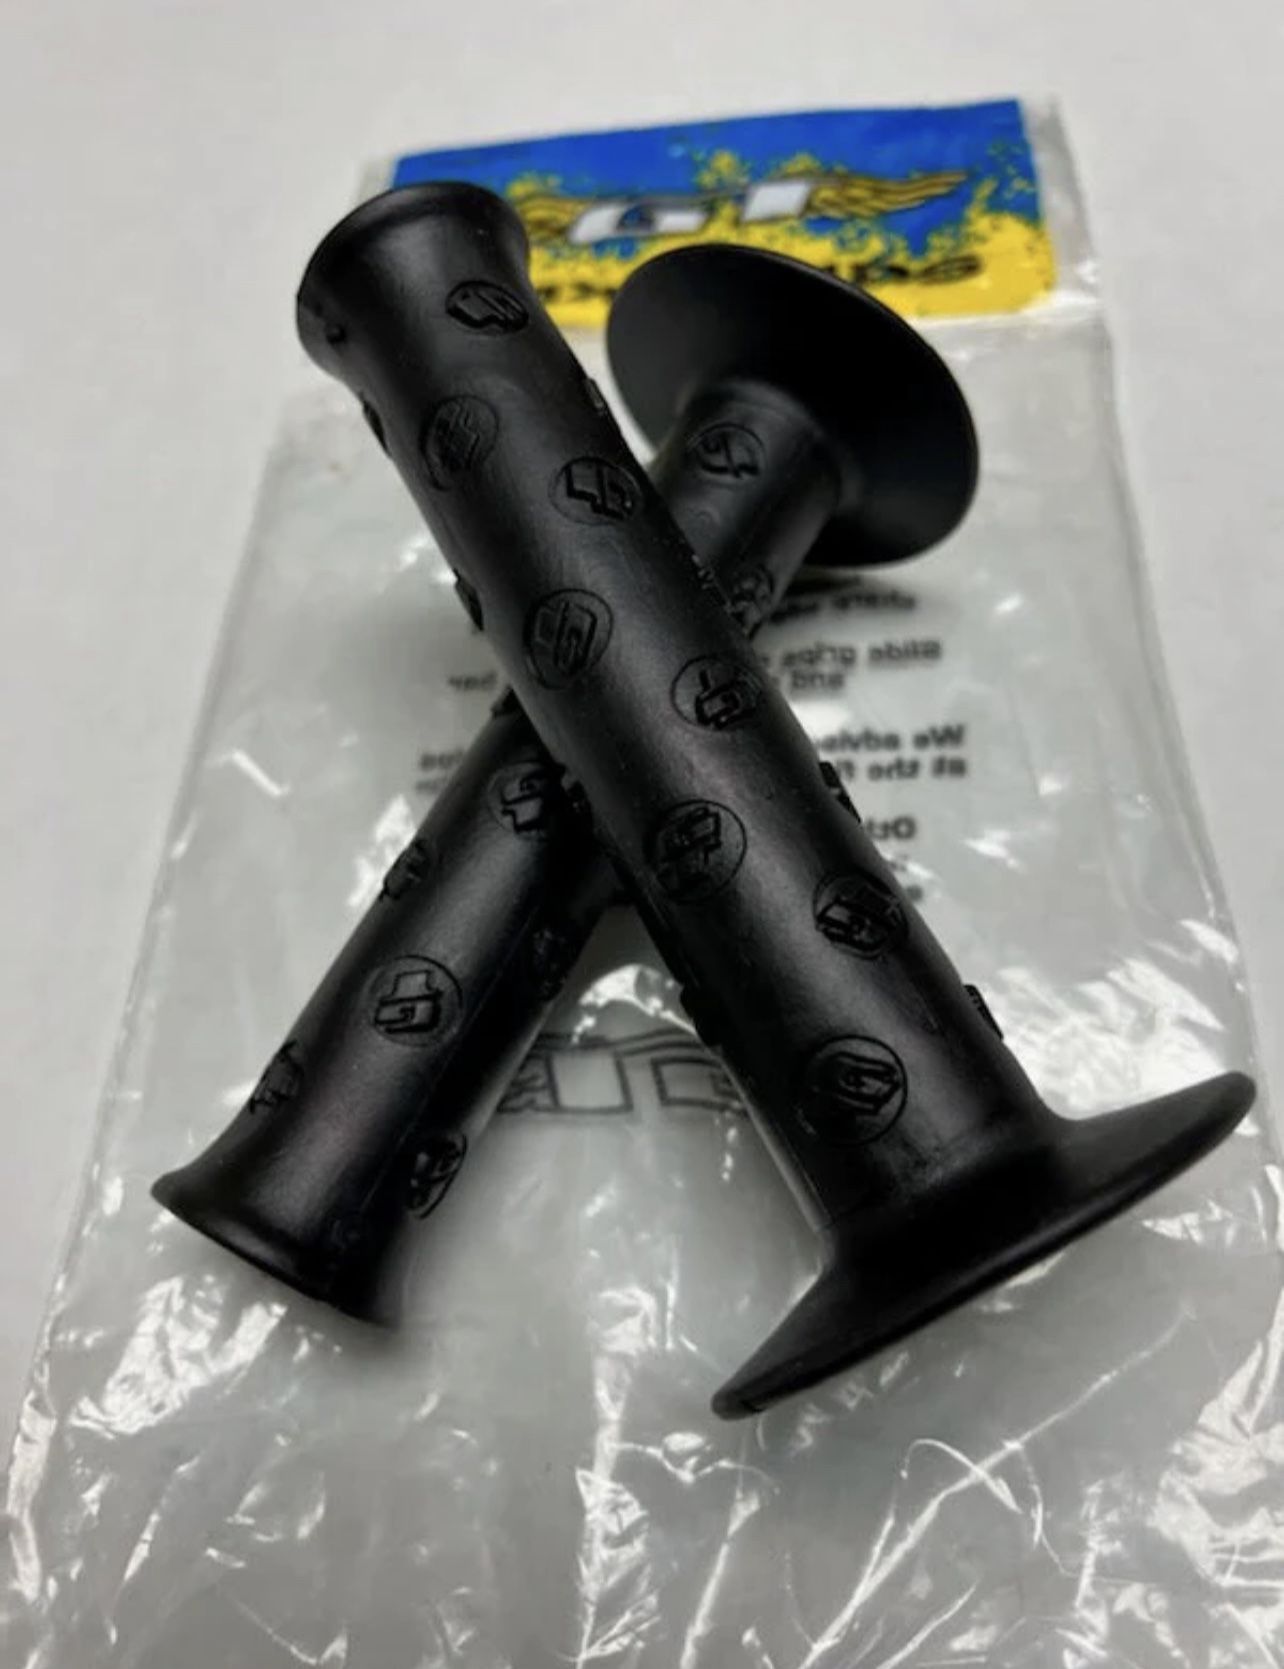 GT Racing Bmx Circle logo Ame Grips Freestyle Old School NOS brand new 